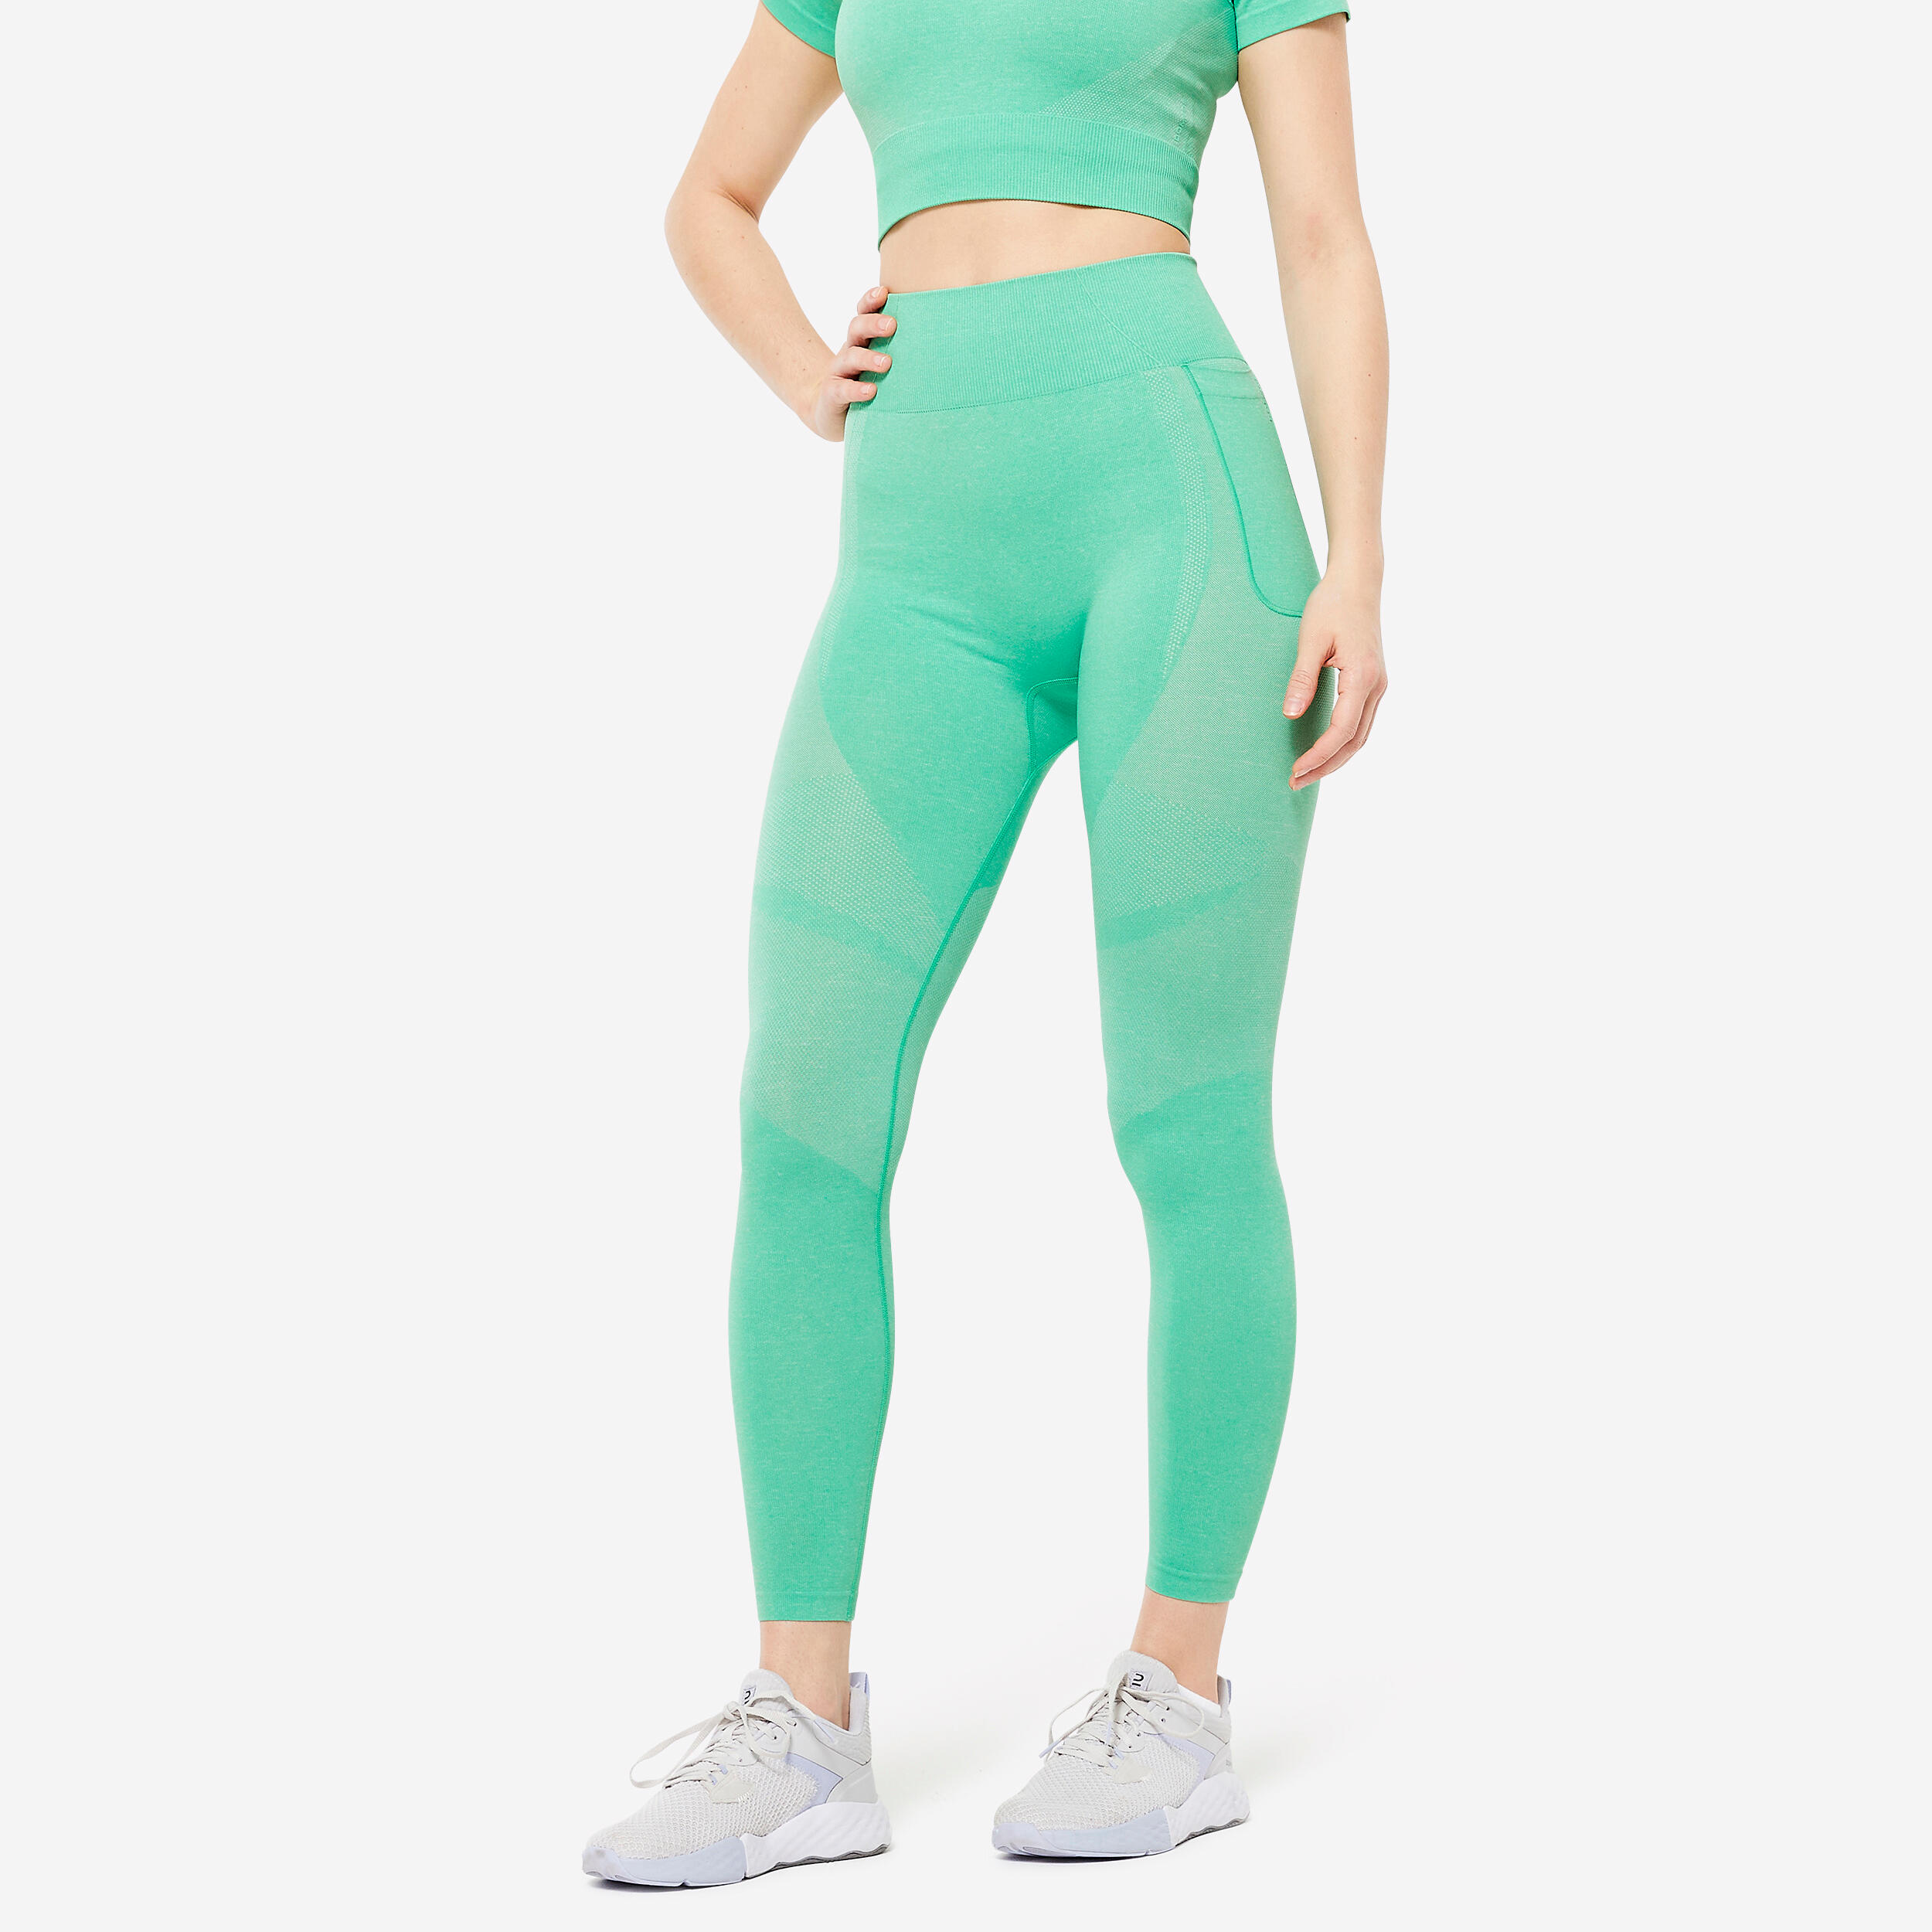 DOMYOS High-Waisted Seamless Fitness Leggings with Phone Pocket - Green